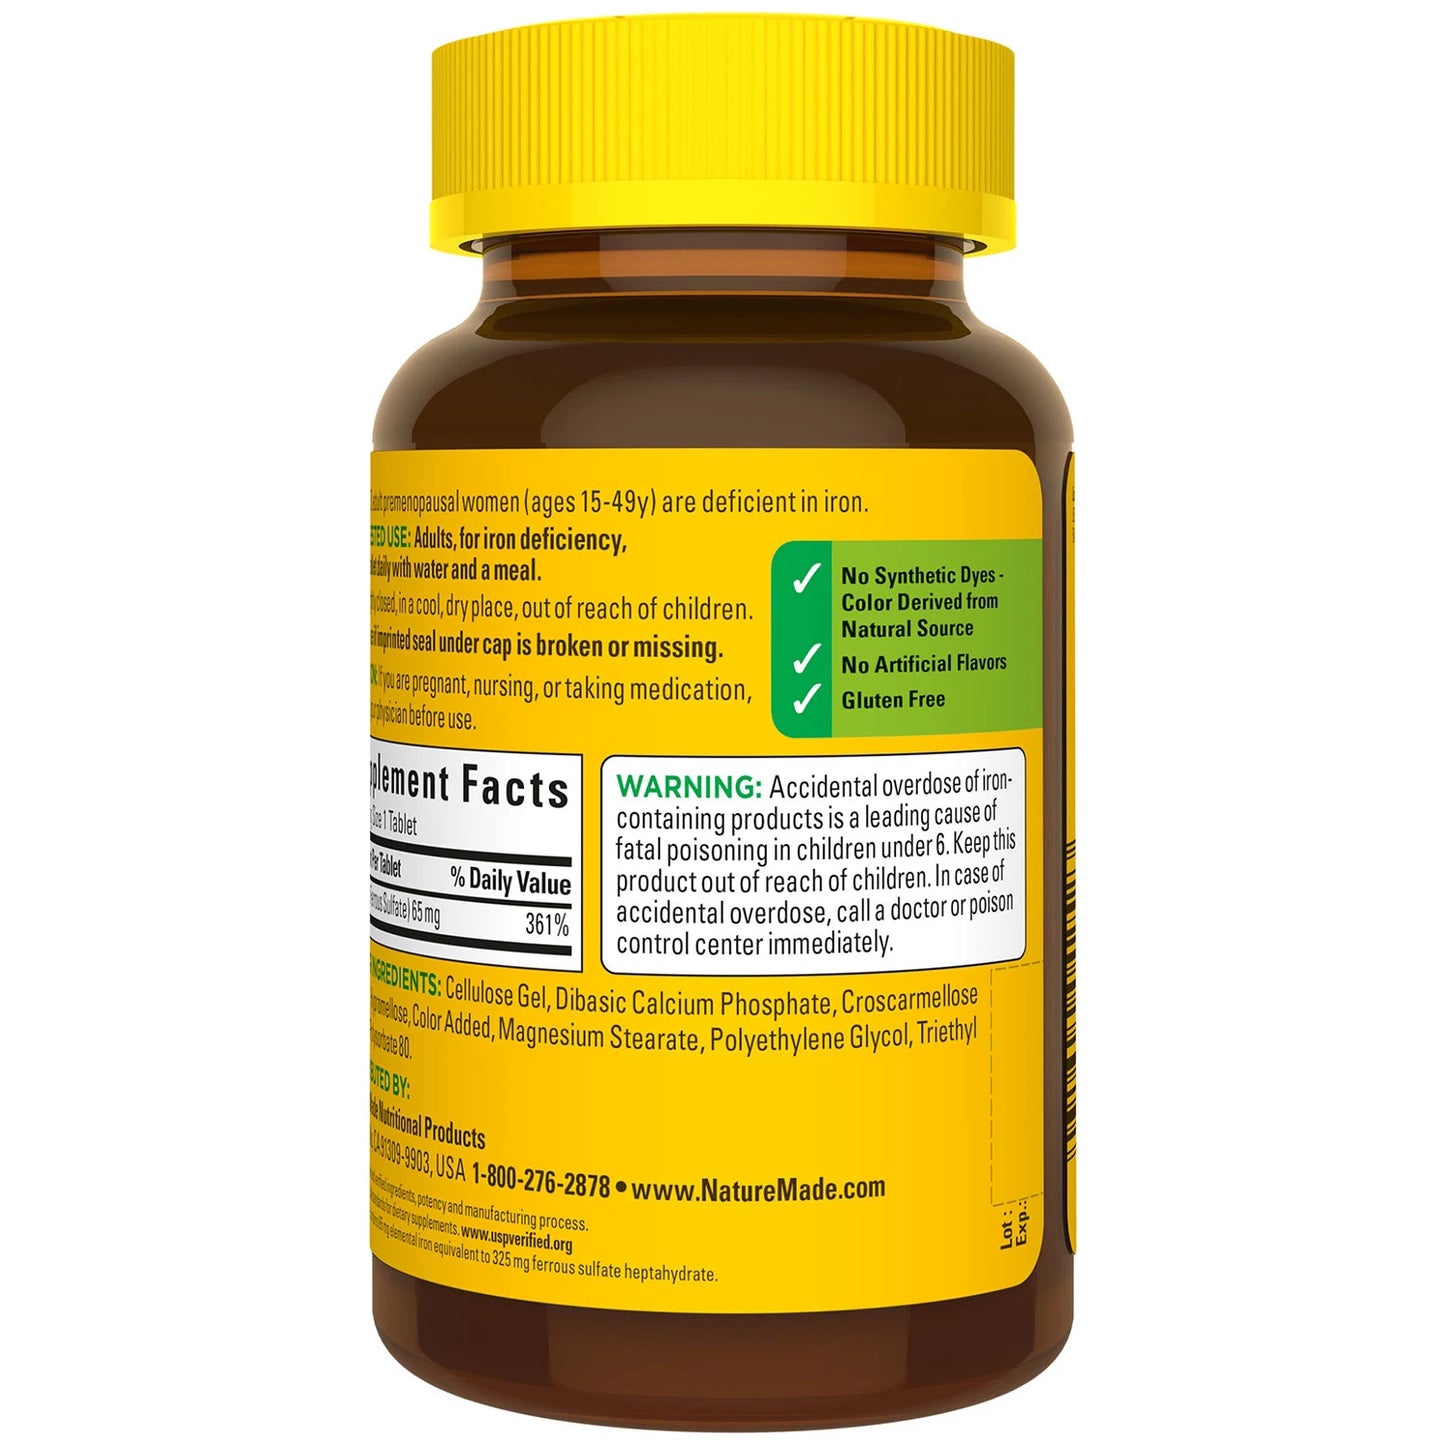 Nature Made Iron 65 mg (from Ferrous Sulfate) Tablets for Red Blood Cell Formation (365 ct.)